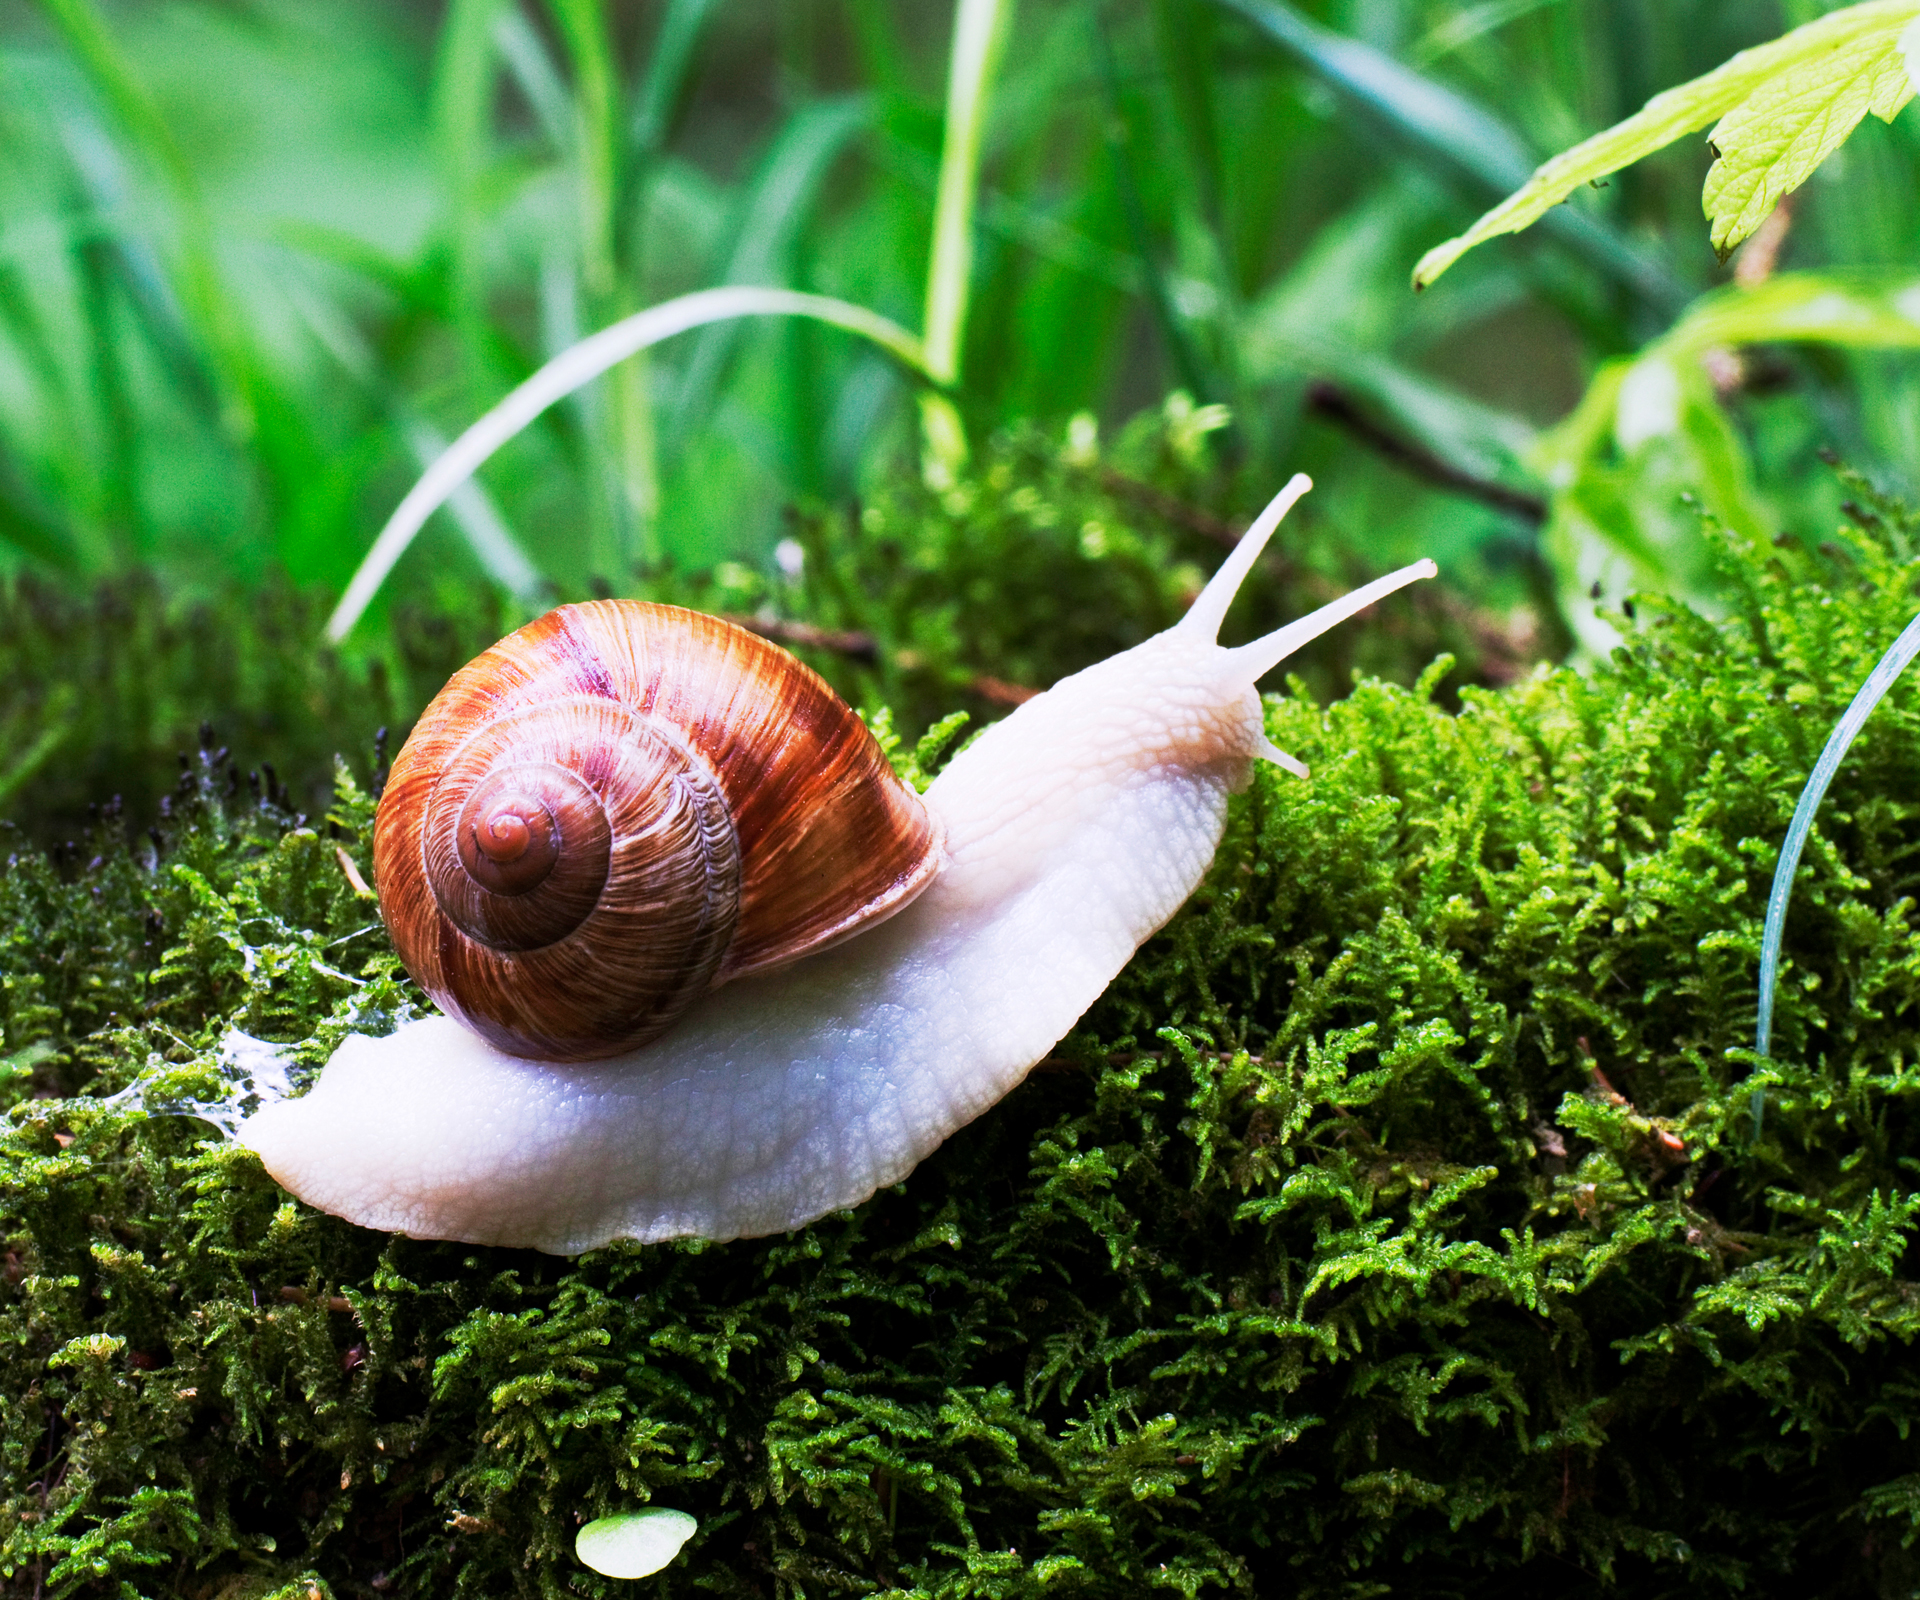 How to: Get rid of snails